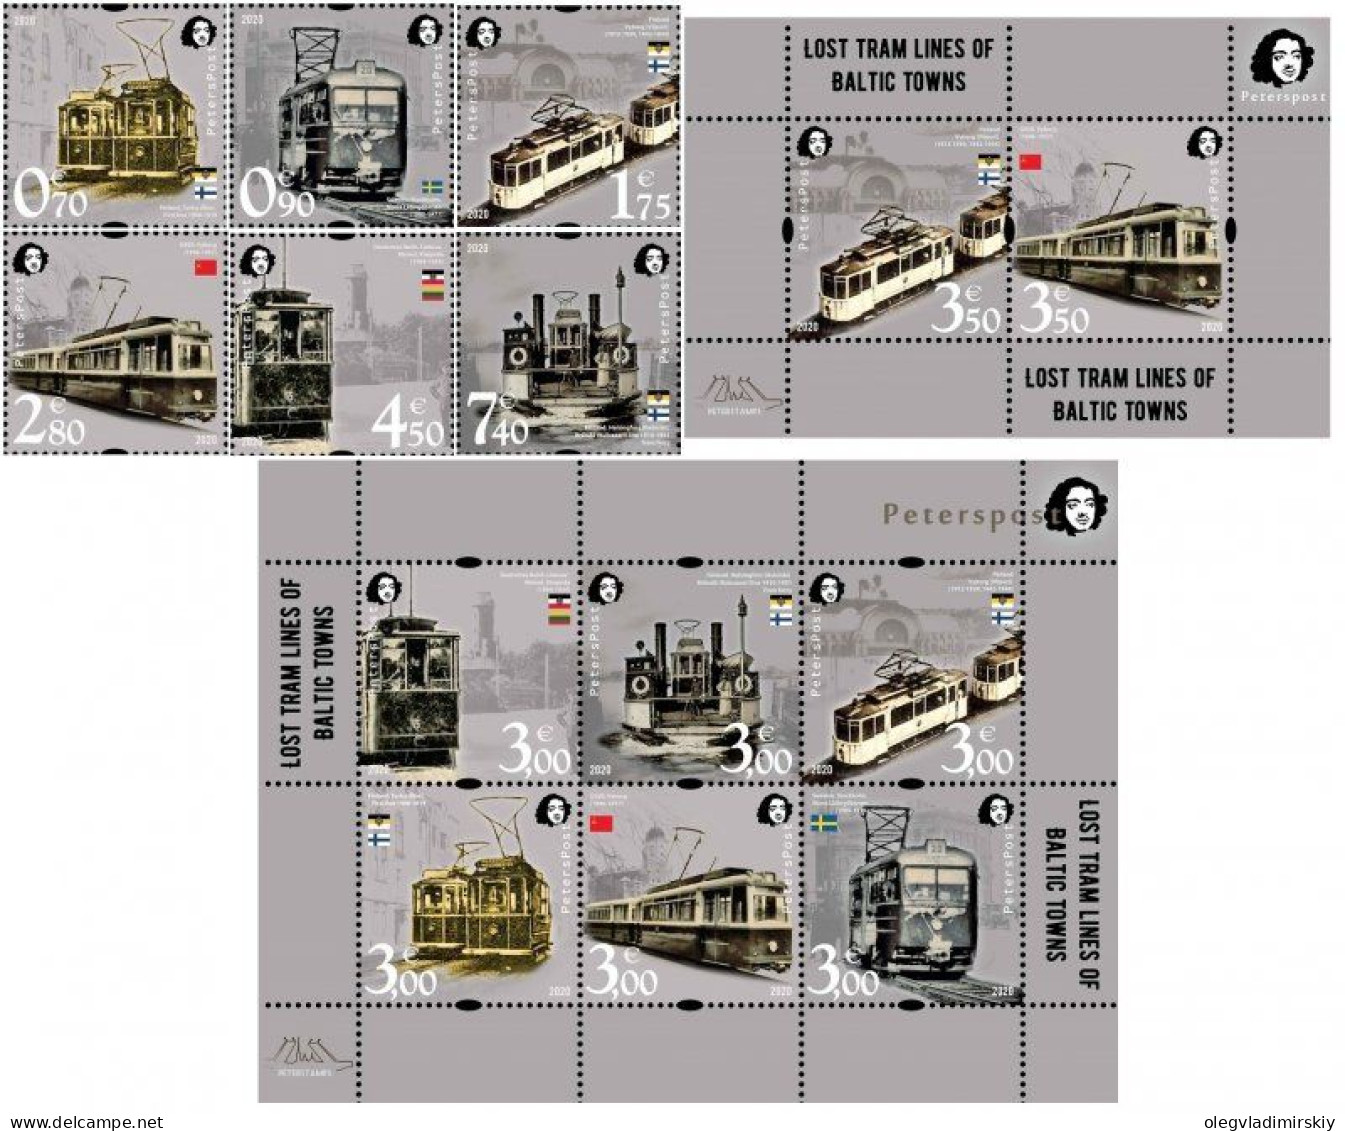 Finland Finnland Finlande 2020 Lost Tram Lines Of Baltic Towns Peterspost Complete Of Stamp Set And 2 Block's MNH - Tranvie